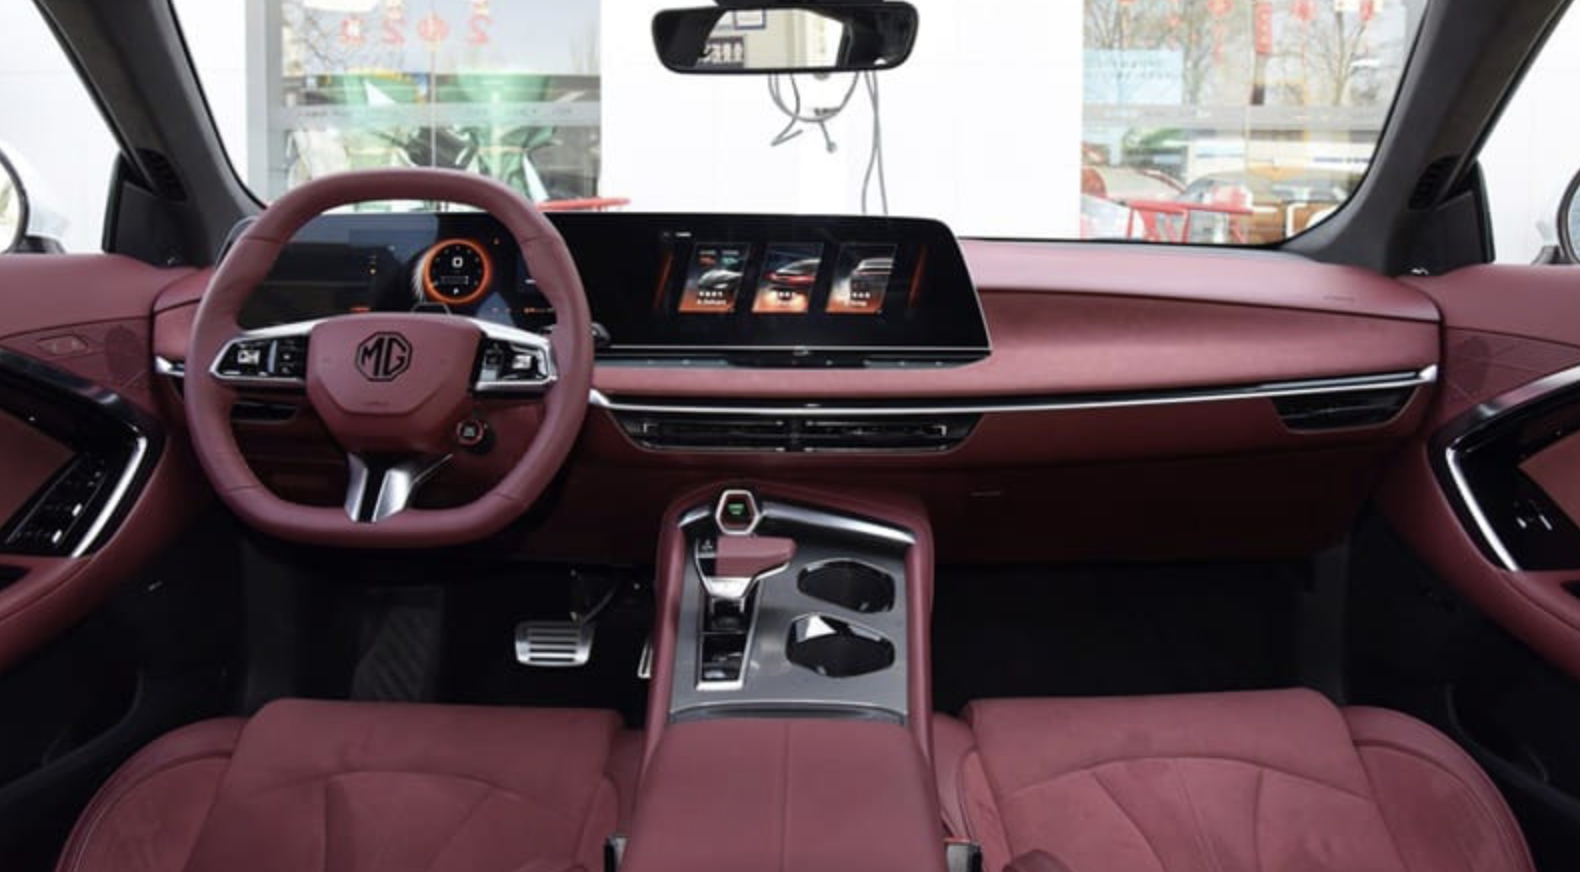 Its modern interior is equipped with two large screens, sporty seats, and an electronic gear selector. Photo: MG